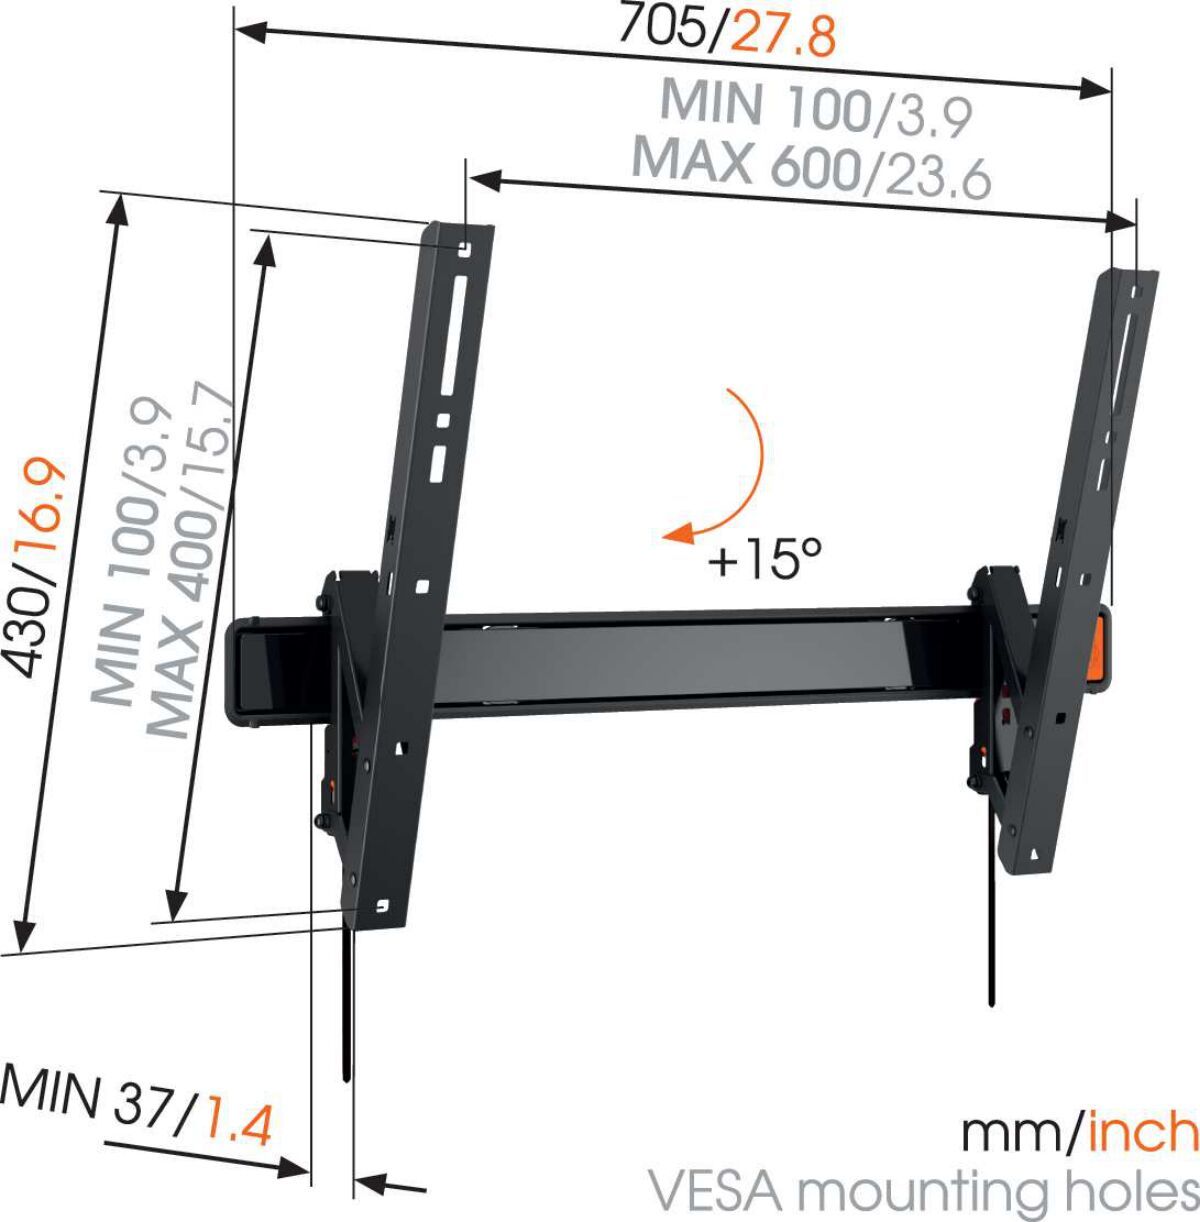 Vogel's W50810 Tilting TV Wall Mount - Suitable for 40 up to 65 inch TVs up to Tilt up to 15° - Dimensions